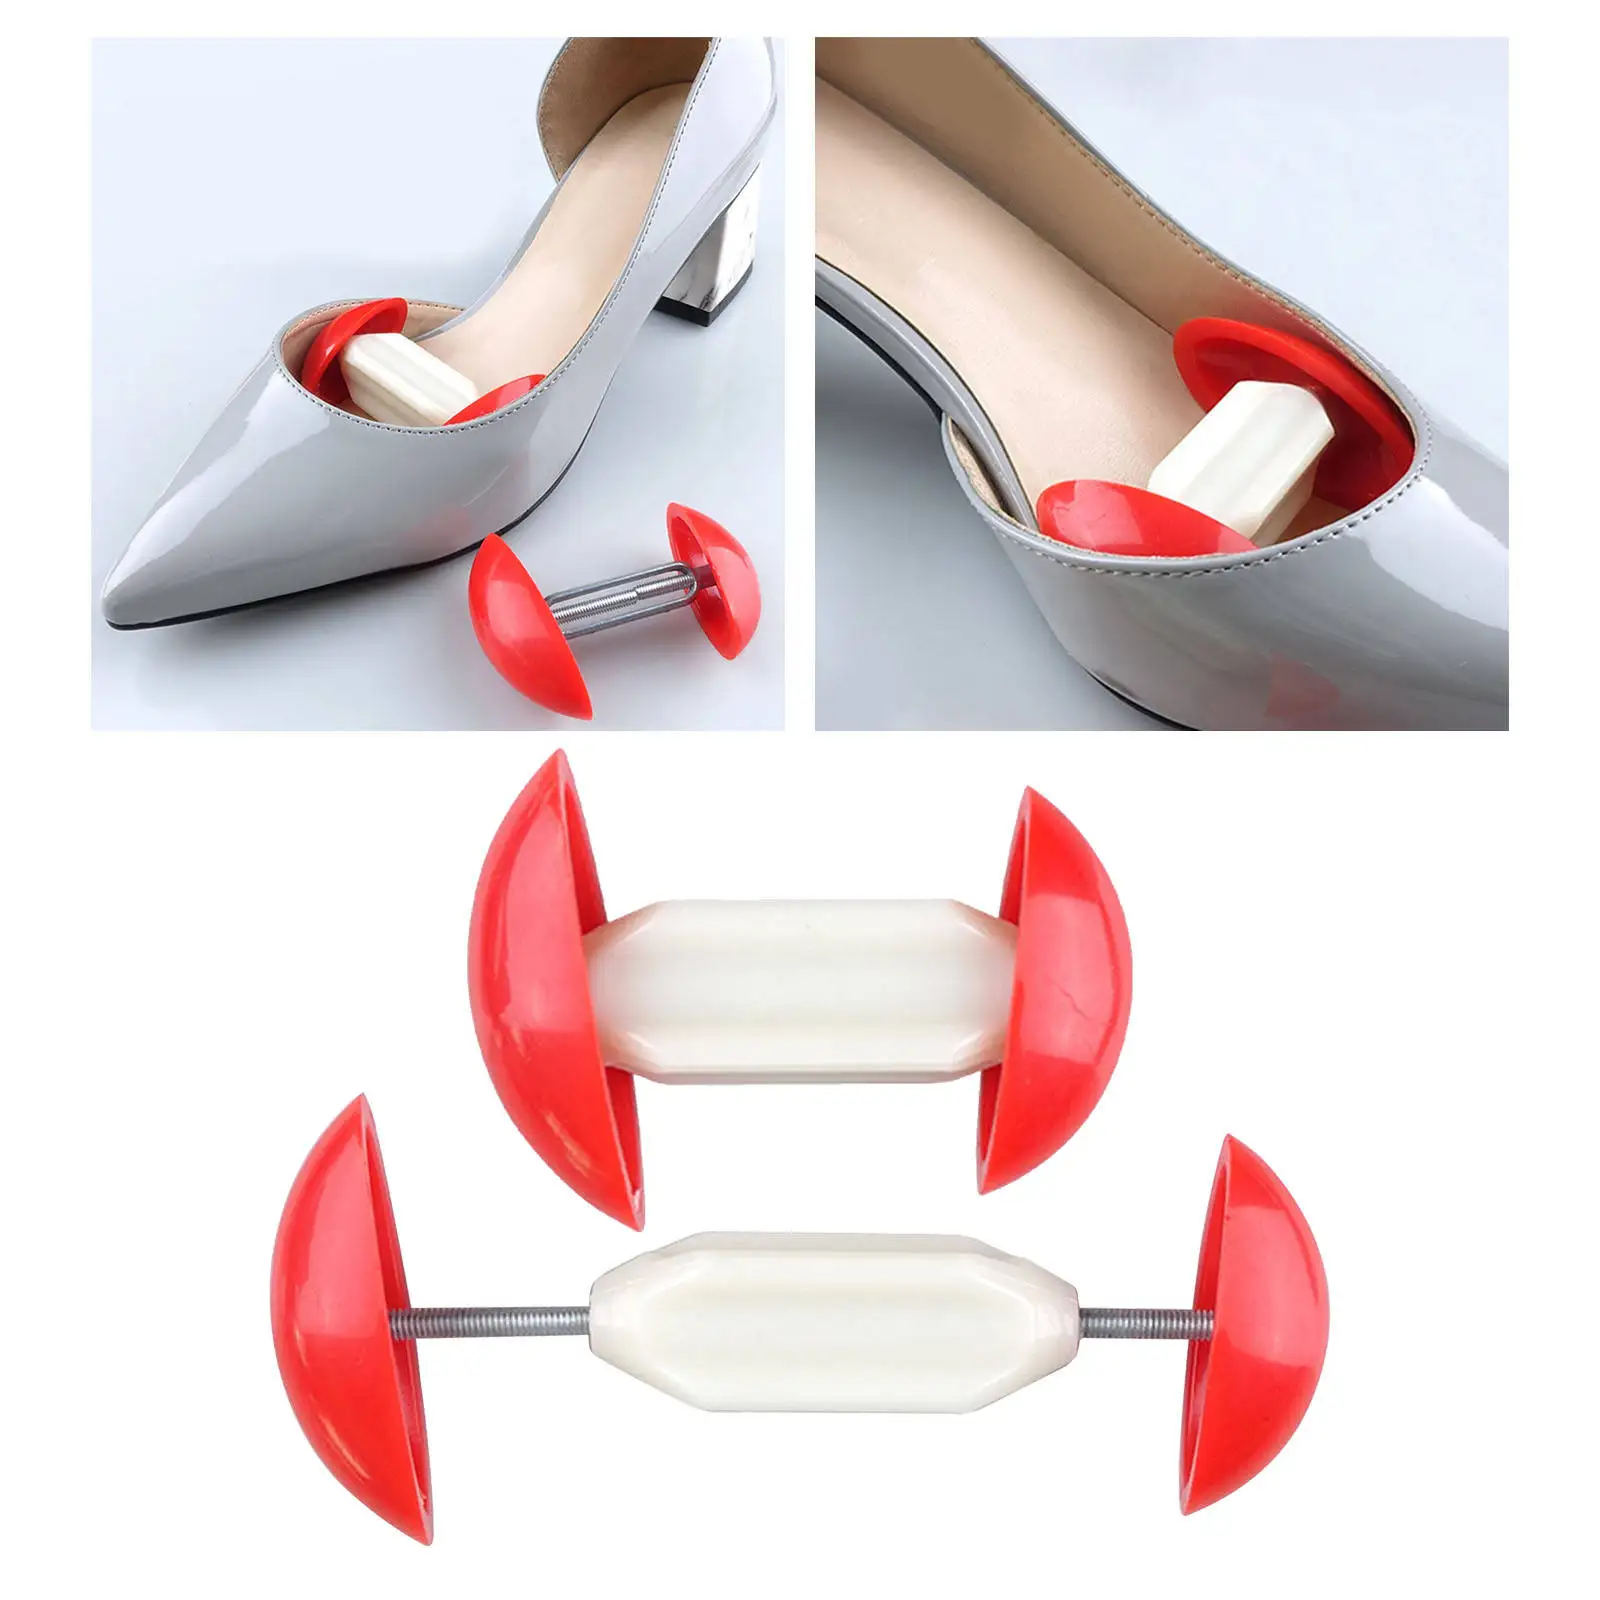 2 Pieces Shoe Stretcher Plastic Simple Adjustable Mini Shoes Trees for High Heels Boots